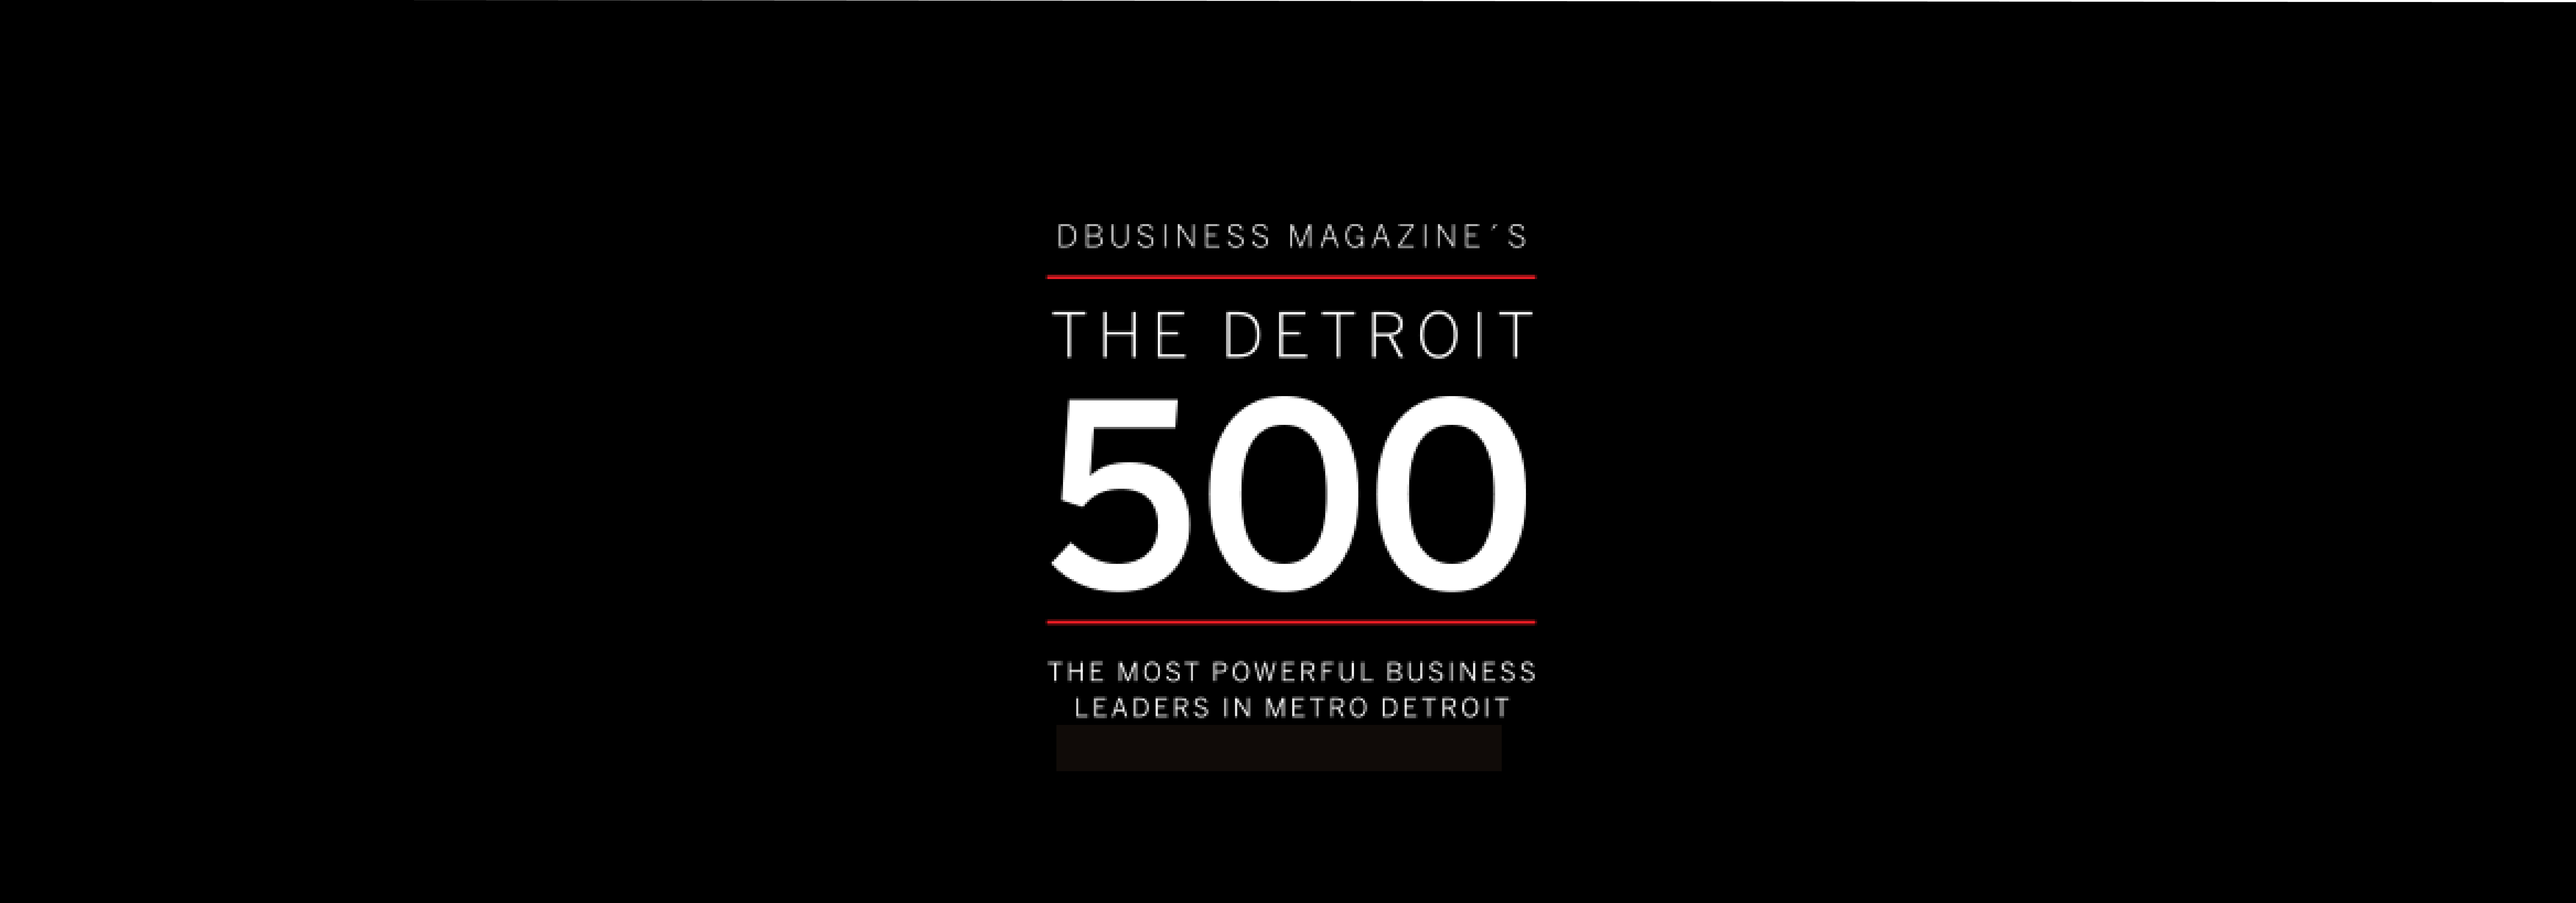 KIRCO’s Chairman and President selected as Two of DBusiness’ “Detroit 500”